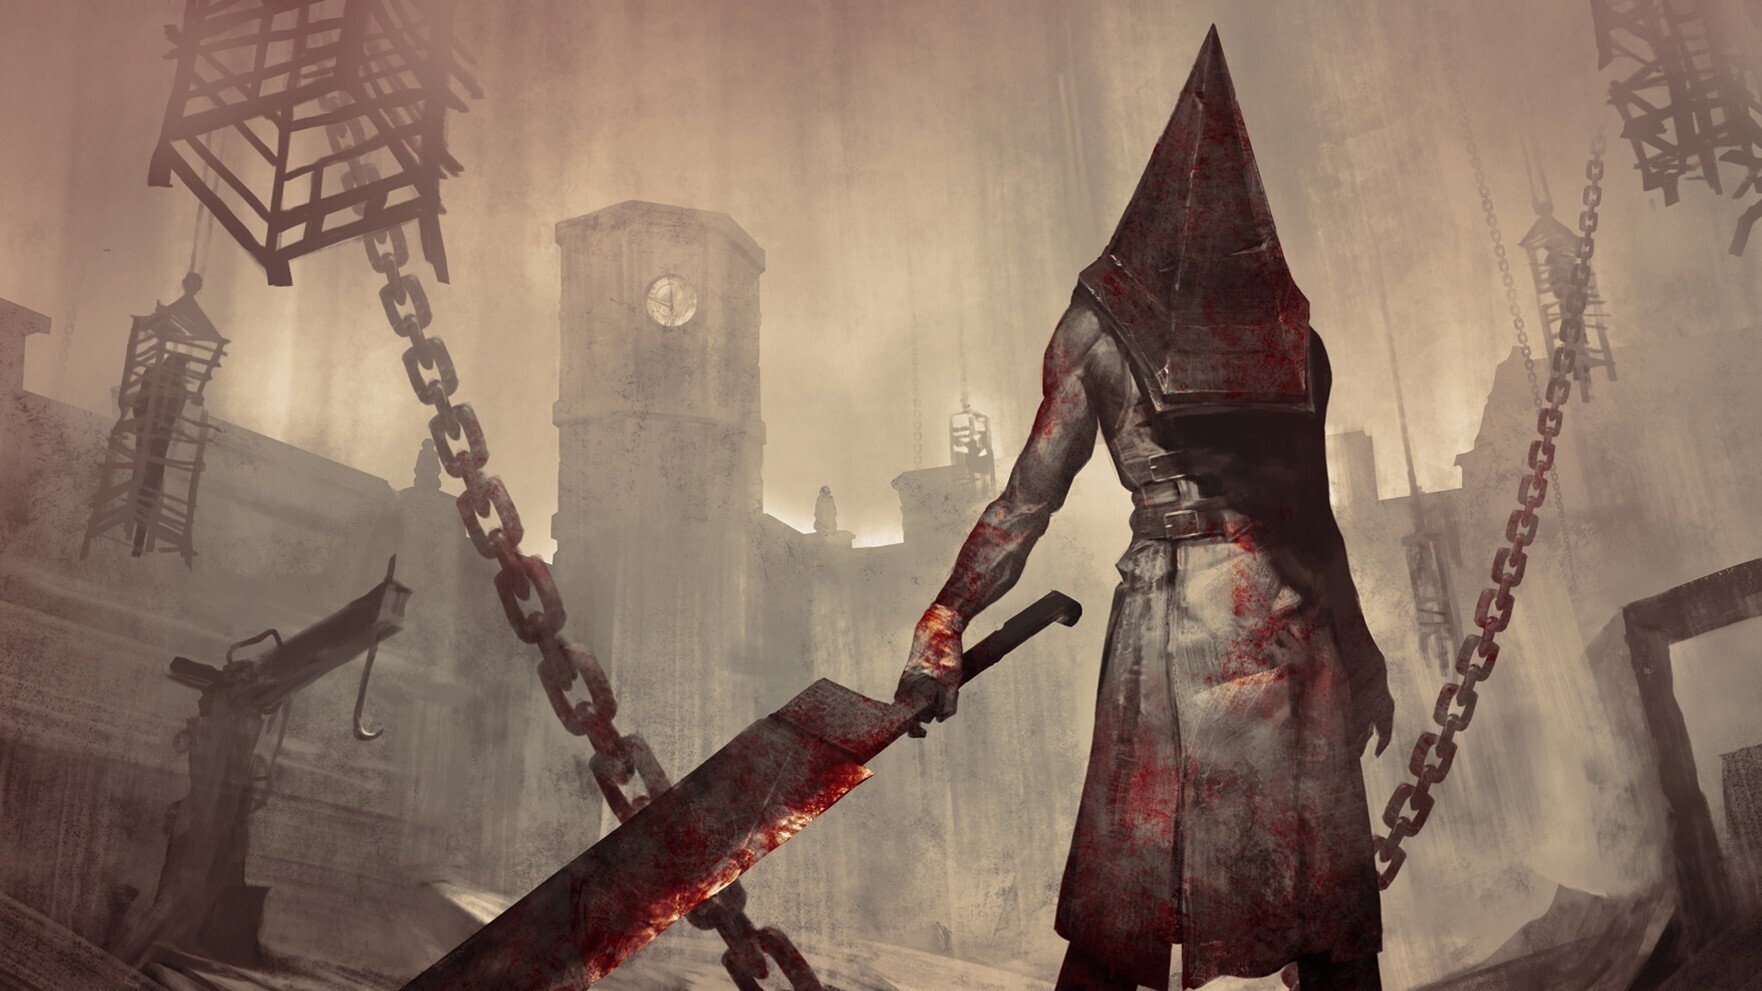 Upcoming Silent Hill Game's Reveal Date And Teaser Trailer Leaked